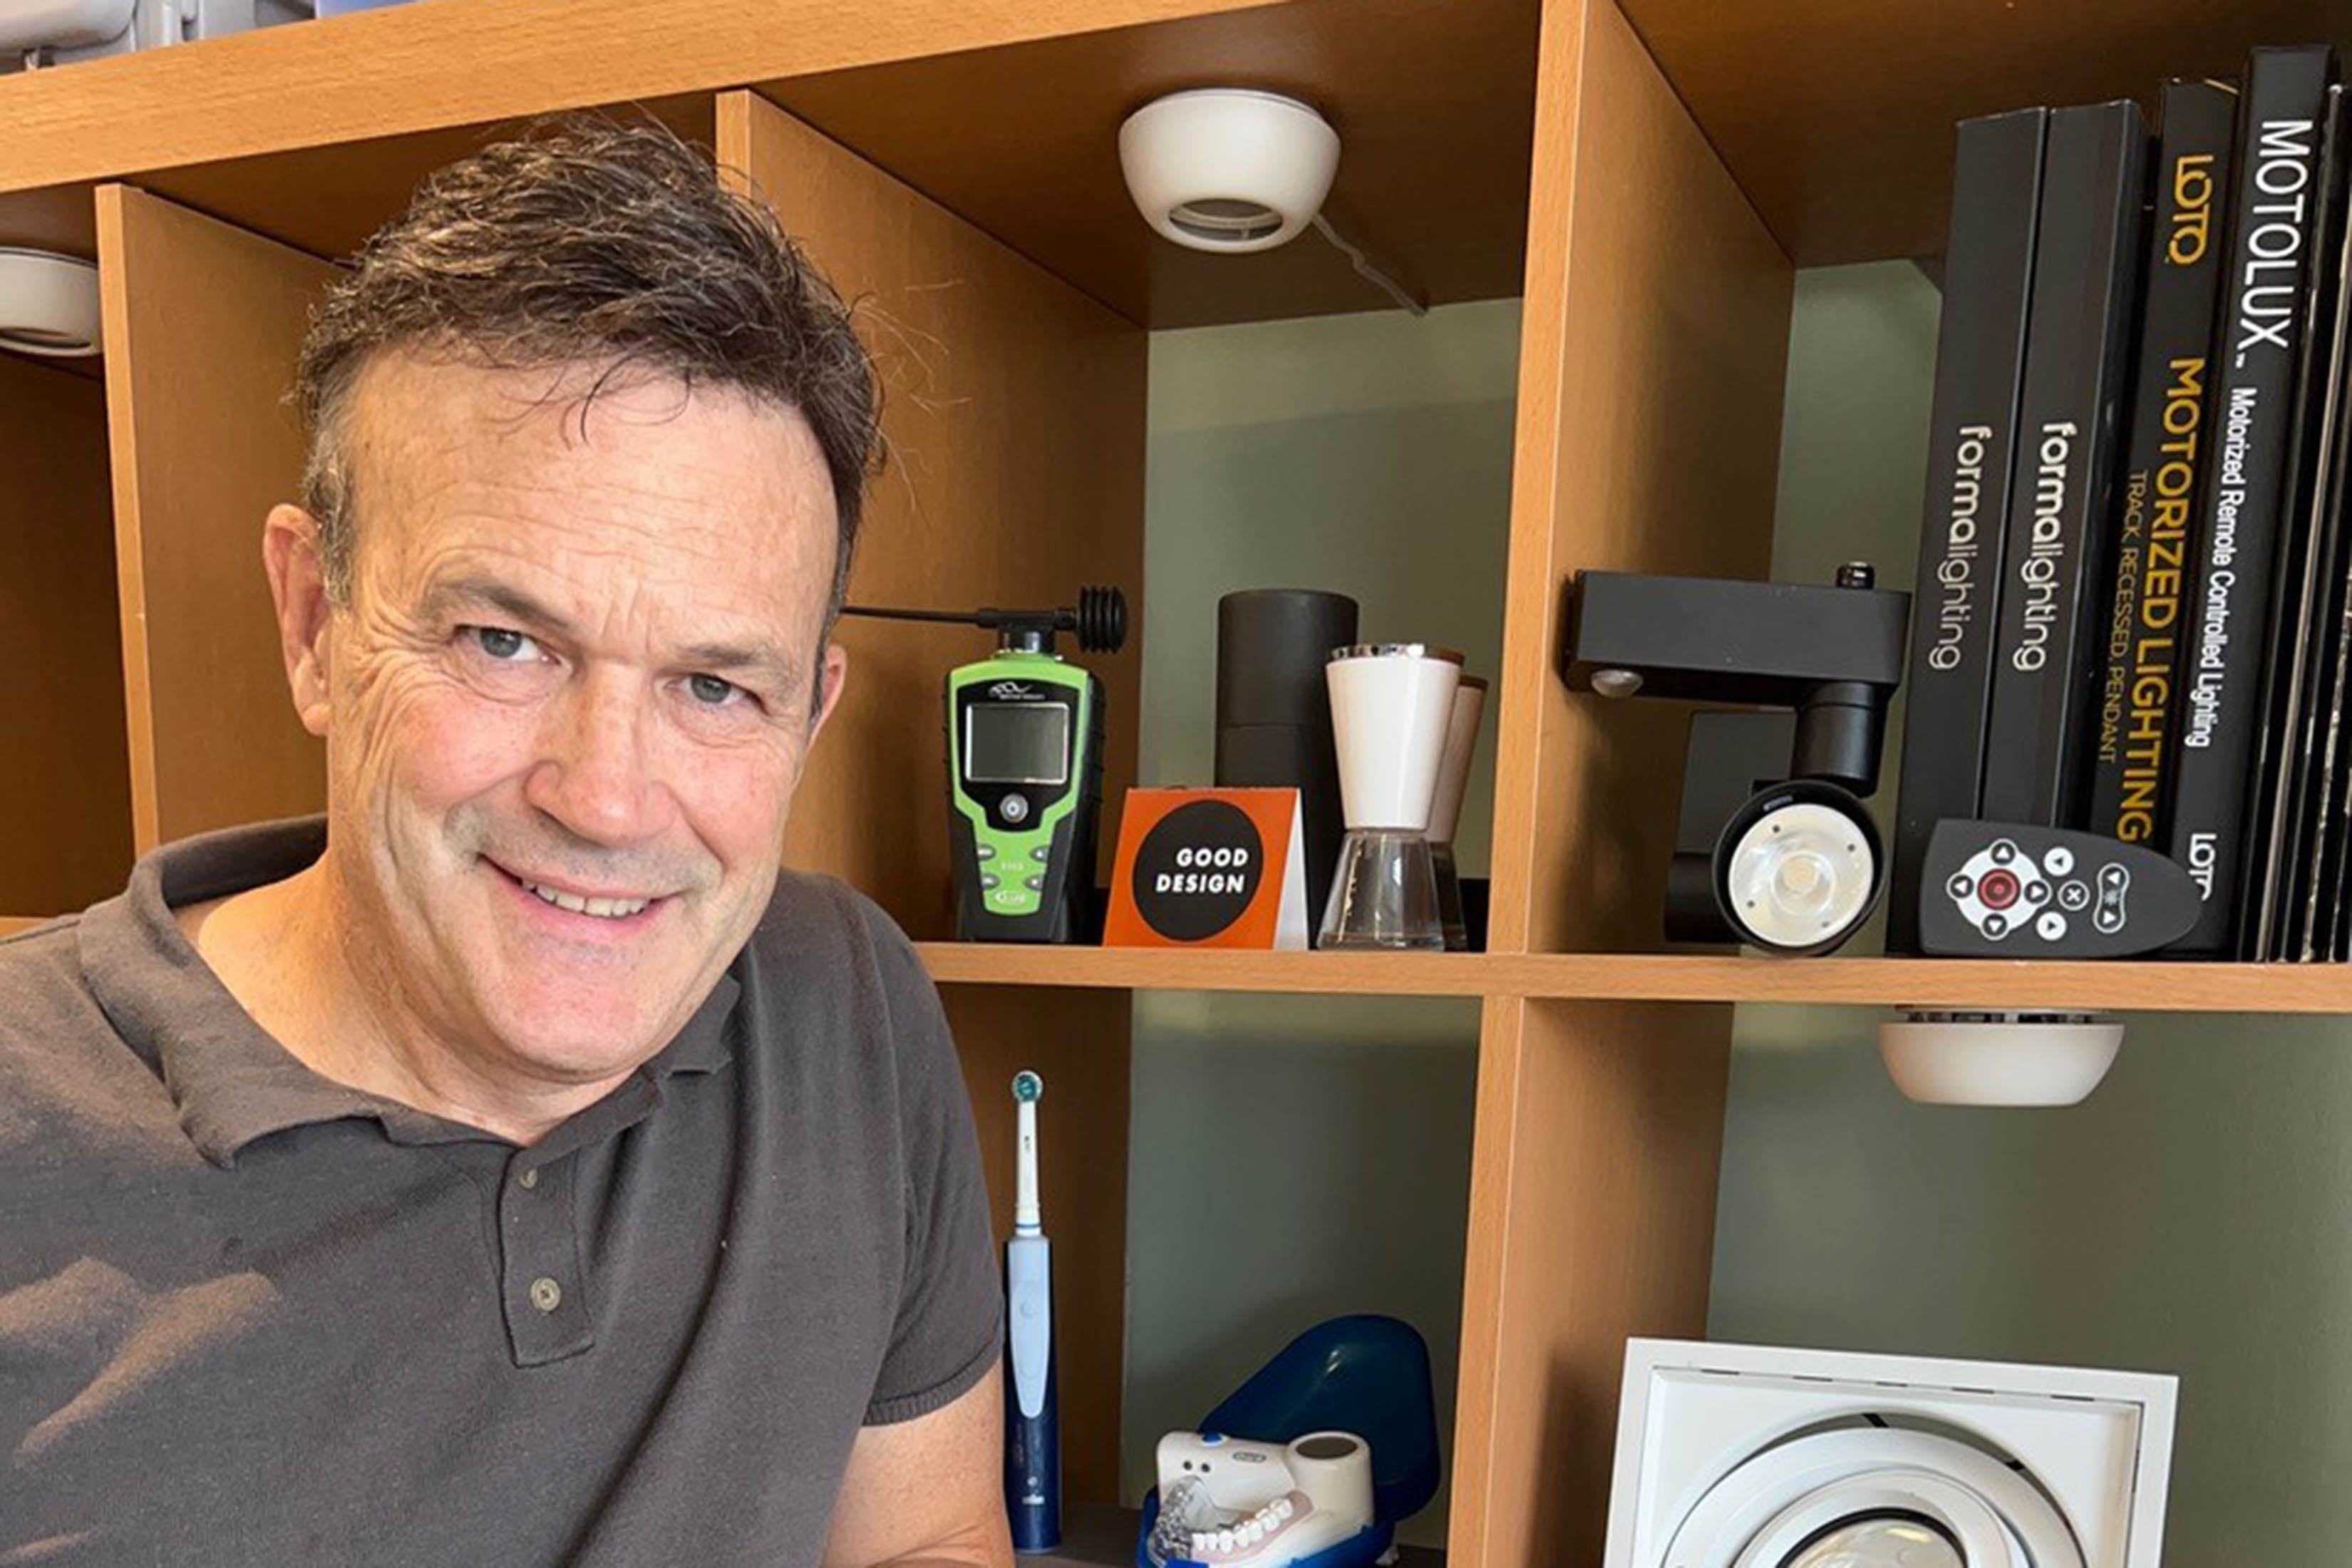 Tom Devlin poses (shoulders-up shot) in front of shelves featuring gadgets and a few books